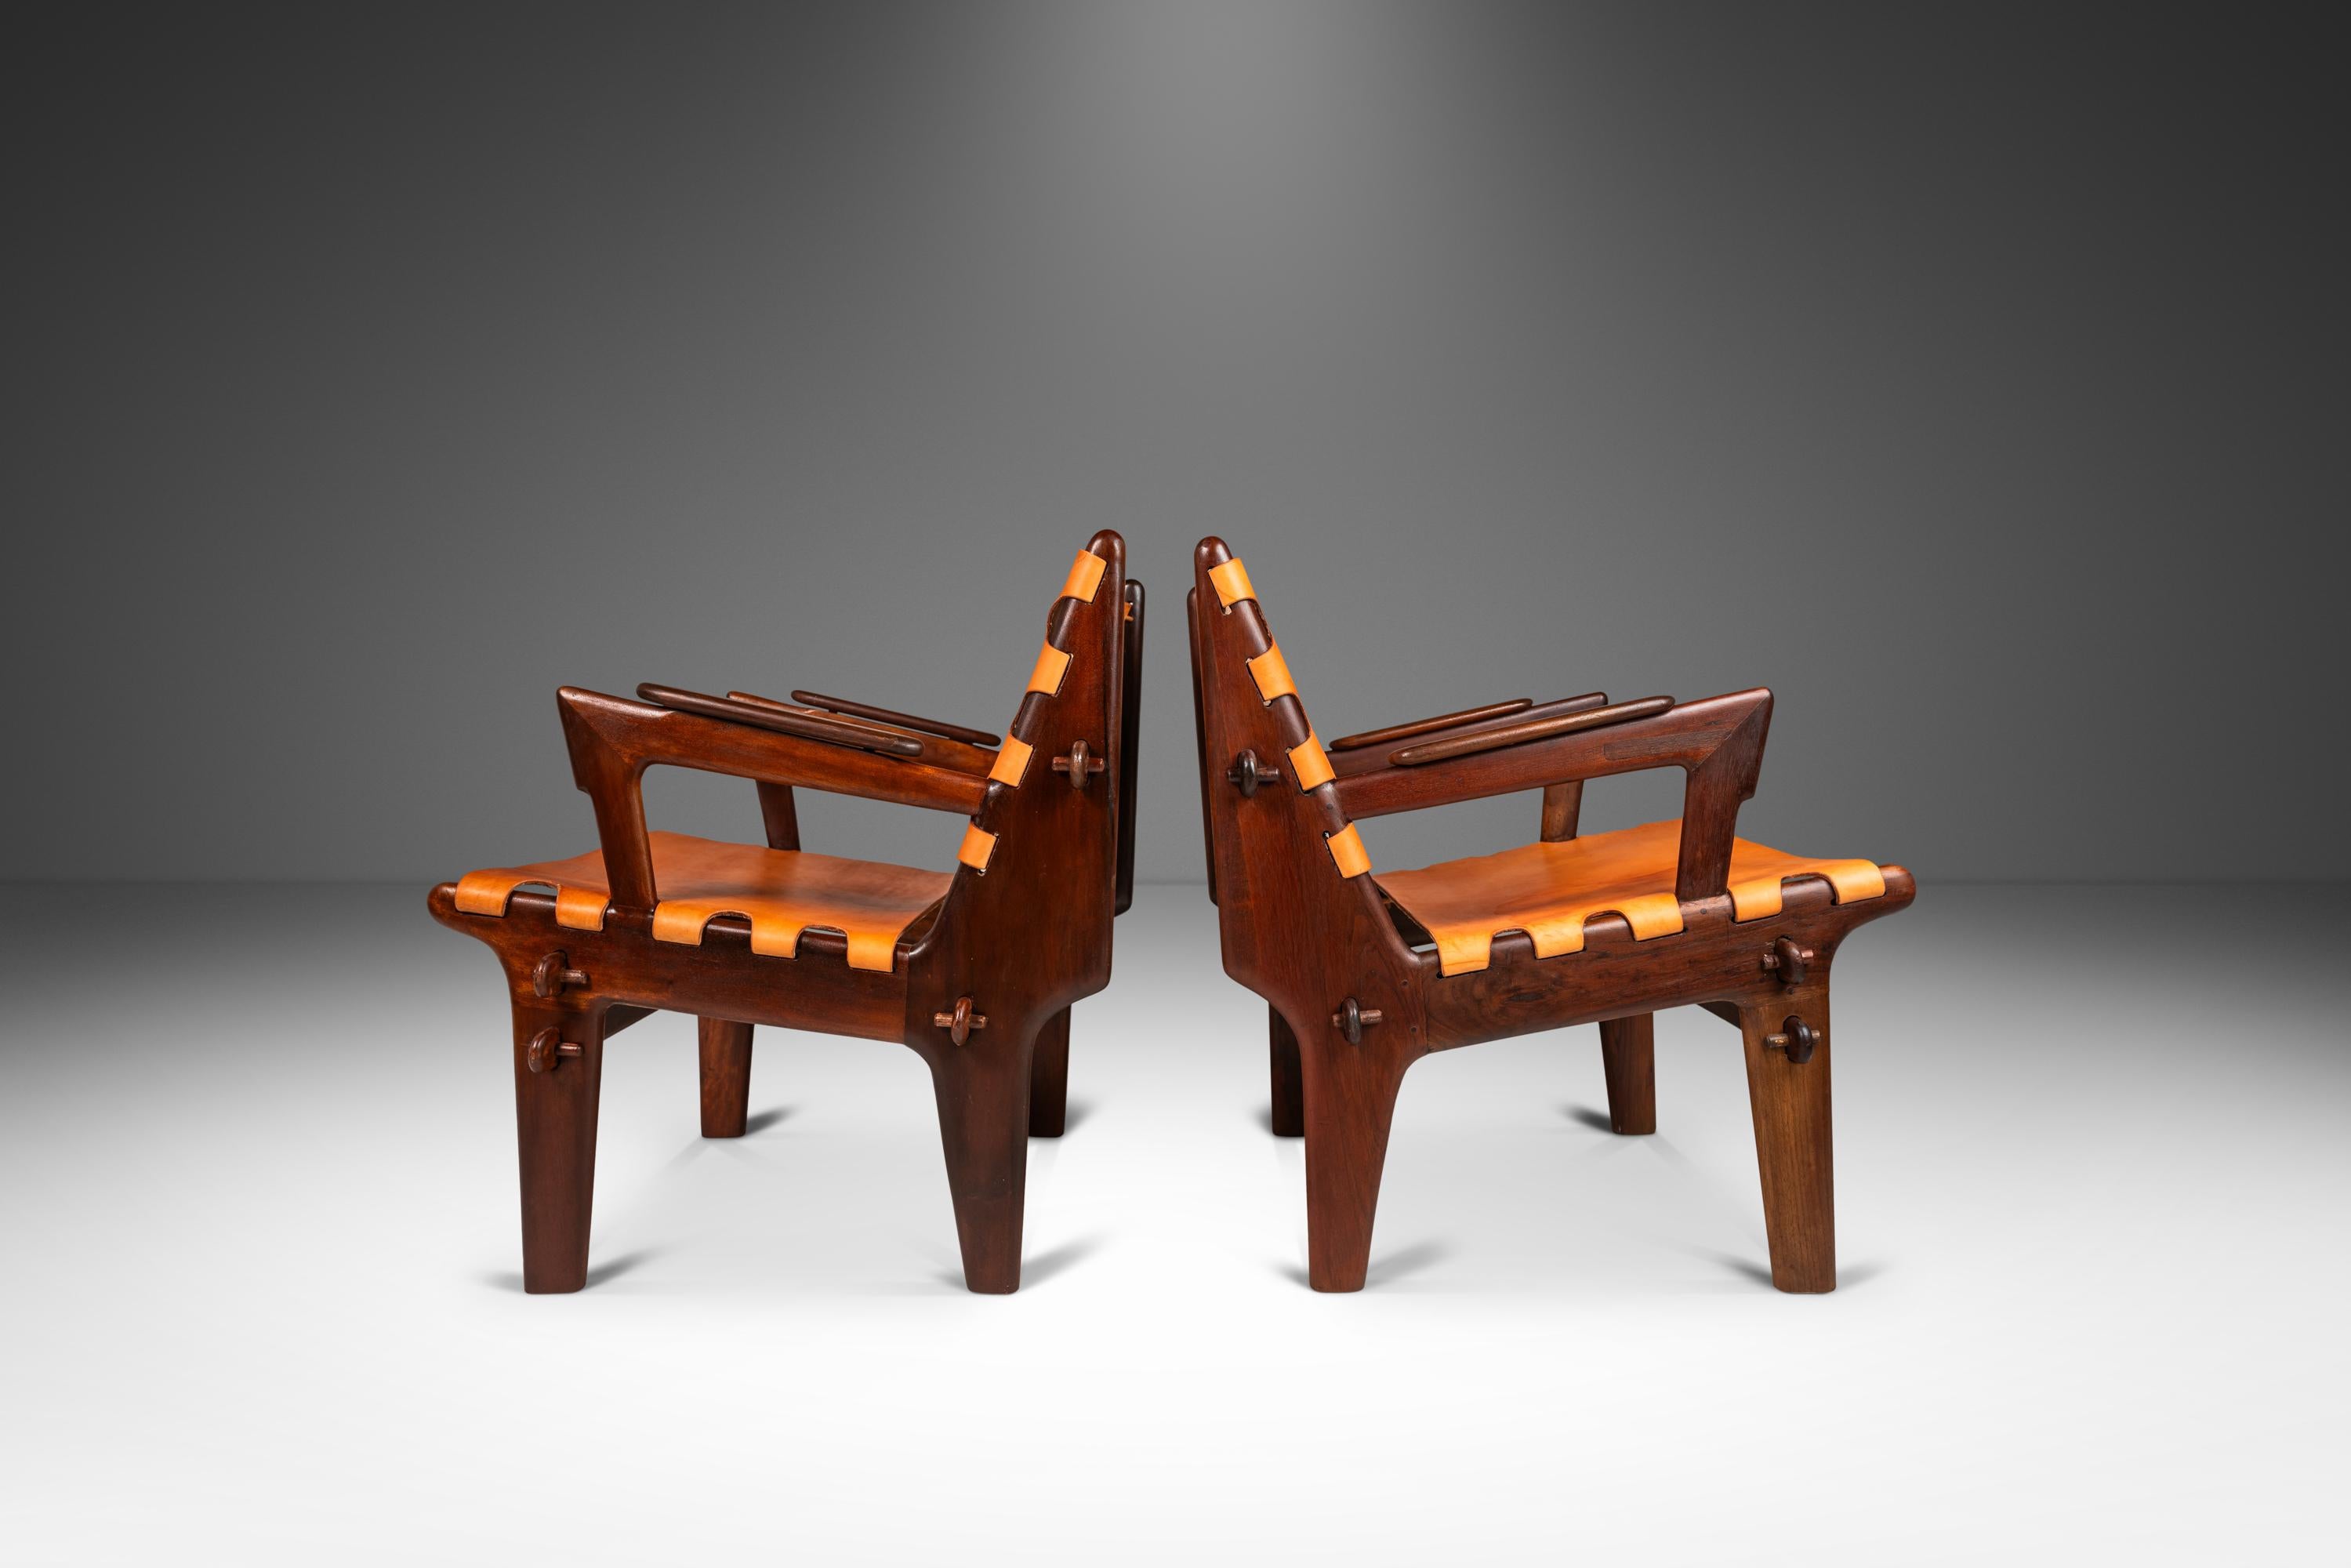 Set of 2 Tooled Leather Sling Lounge Chairs by Angel Pazmino, Ecuador, c. 1960's In Good Condition For Sale In Deland, FL